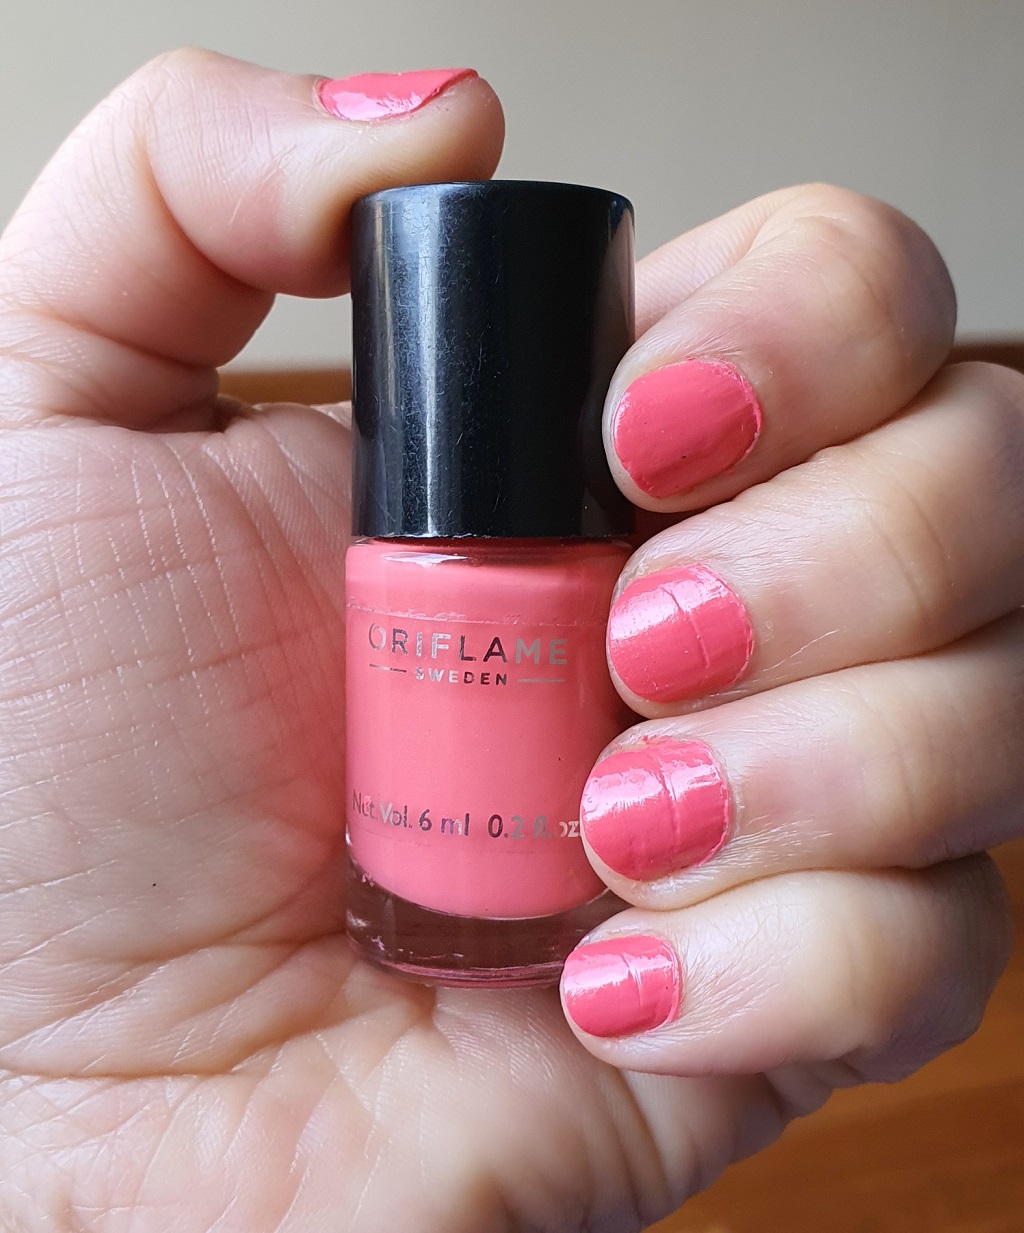 Oriflame Pure Color Nail Polish Mini 30796 Pink Crush Sense It Eve Oriflame Pure Color Nail Polish Mini : Review & Swatches